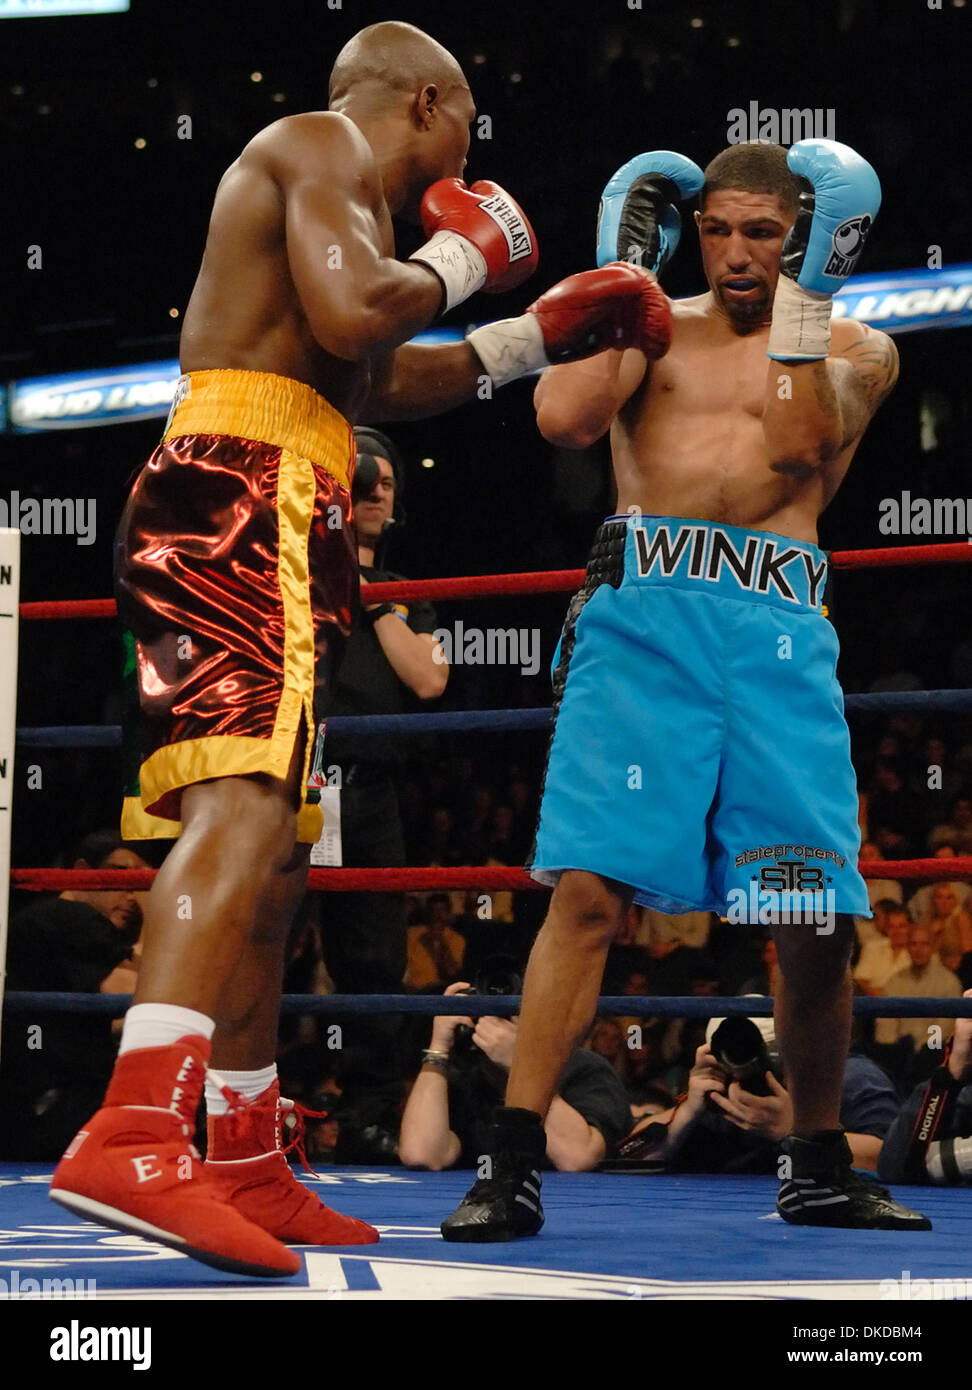 Dec 03, 2006; Tampa, FL, USA; Boxer RONALD 'WINKY' WRIGHT defeats IKE 'BAZOOKA' QUARTEY by decision in front of a packed house at The St. Pete Times Forum in Tampa, Florida. 12/3/06, Tampa, Florida, Rob DeLorenzo Mandatory Credit: Photo by Rob DeLorenzo/ZUMA Press. (©) Copyright 2006 by Rob DeLorenzo Stock Photo